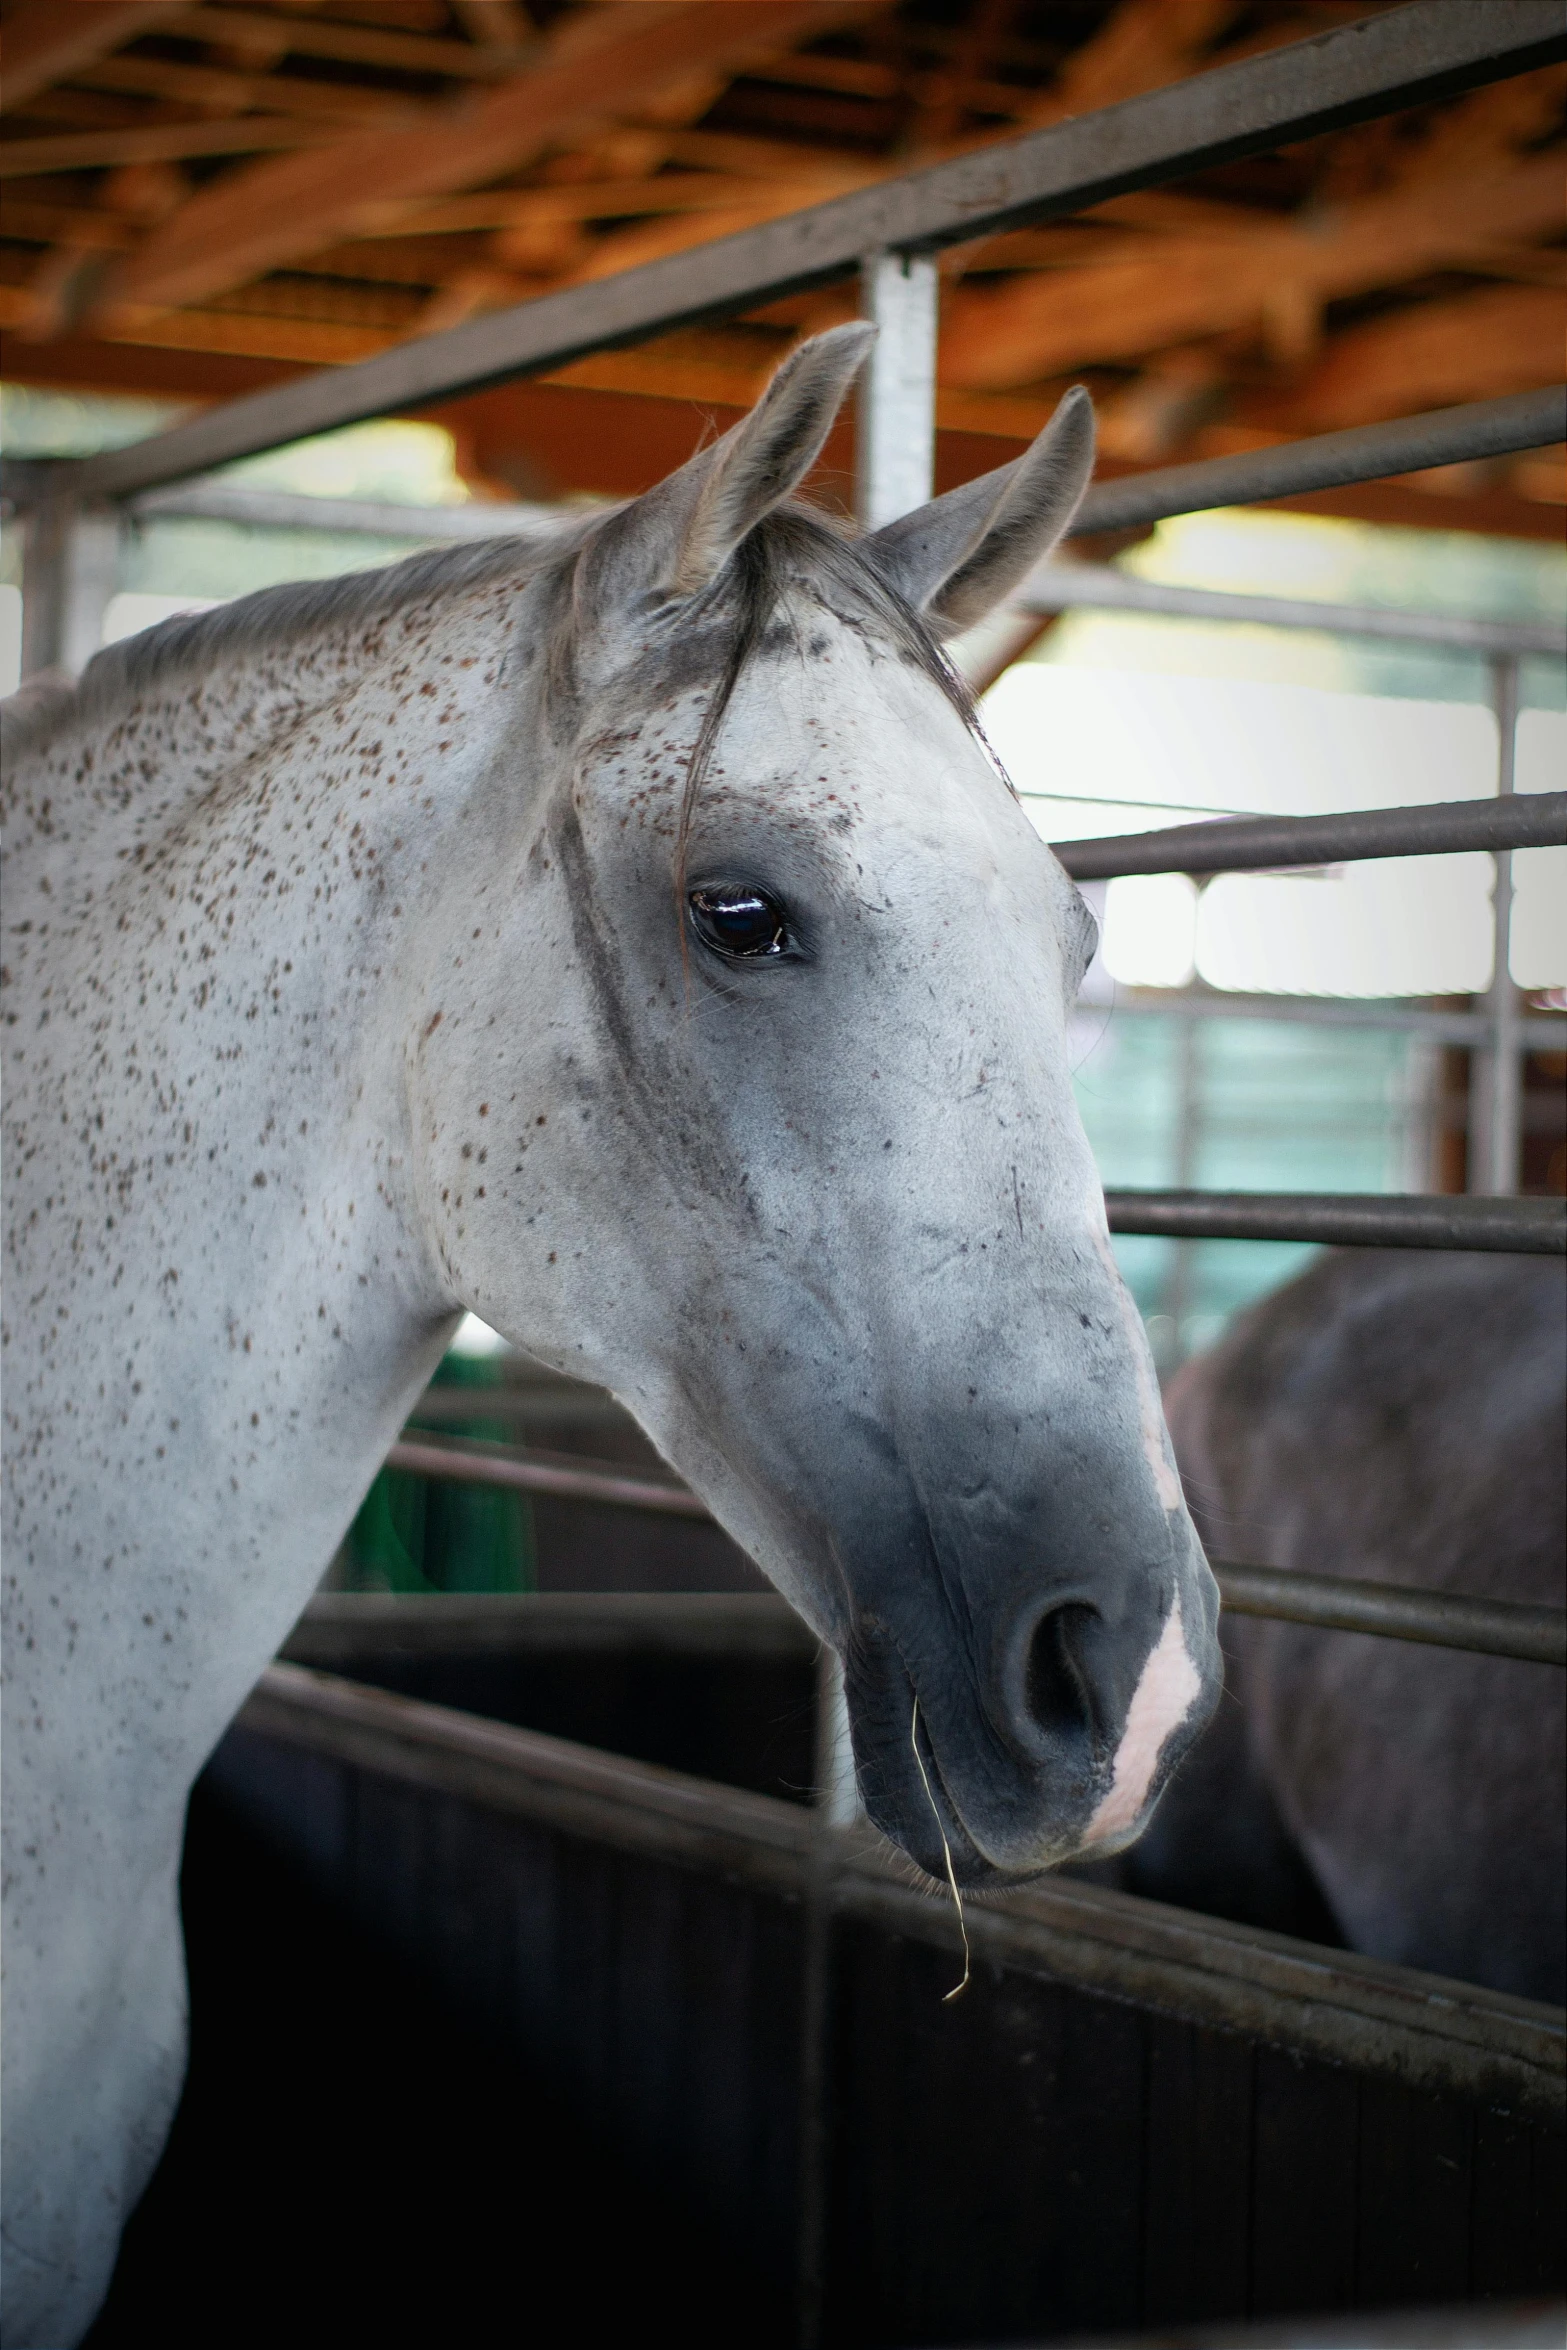 a white horse with black speckles stands next to other horses